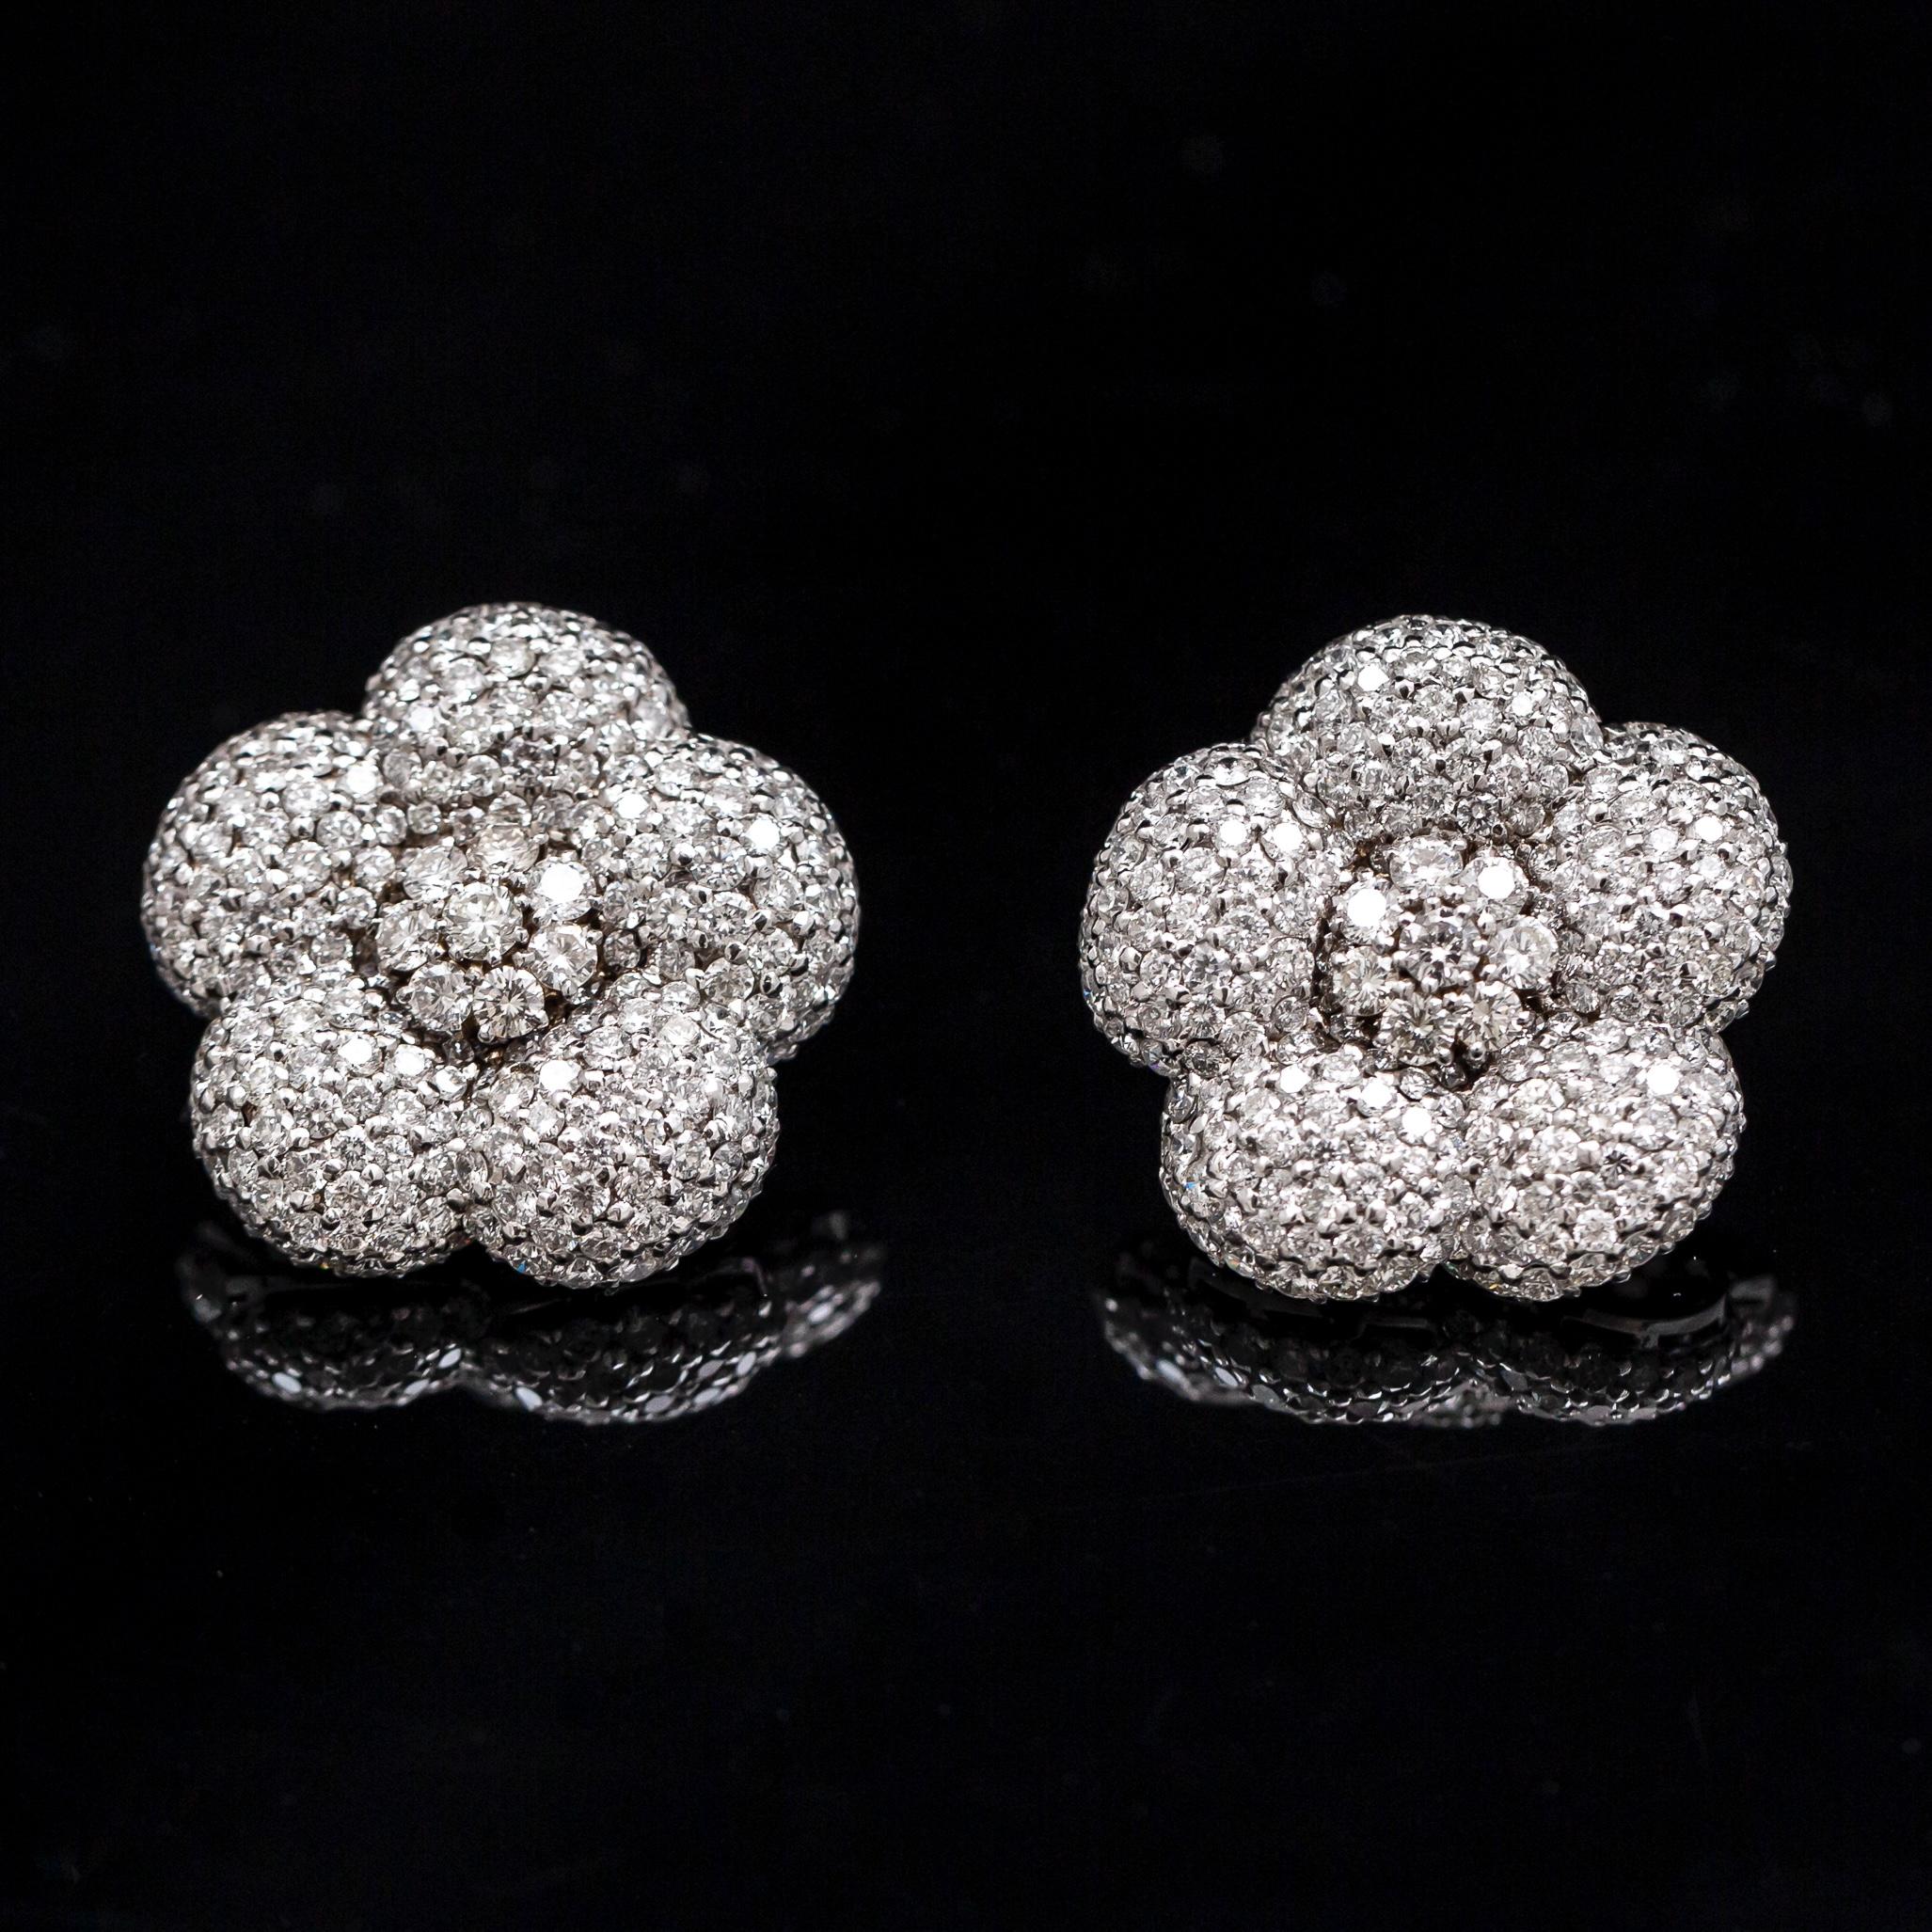 Vintage flower diamond earrings in 19.2kt white gold, Portugal, circa 1990. Each of these elegant floral earrings is composed by five petals pave-set throughout with over 200 round brilliant-cut diamonds, the center further accented with eight